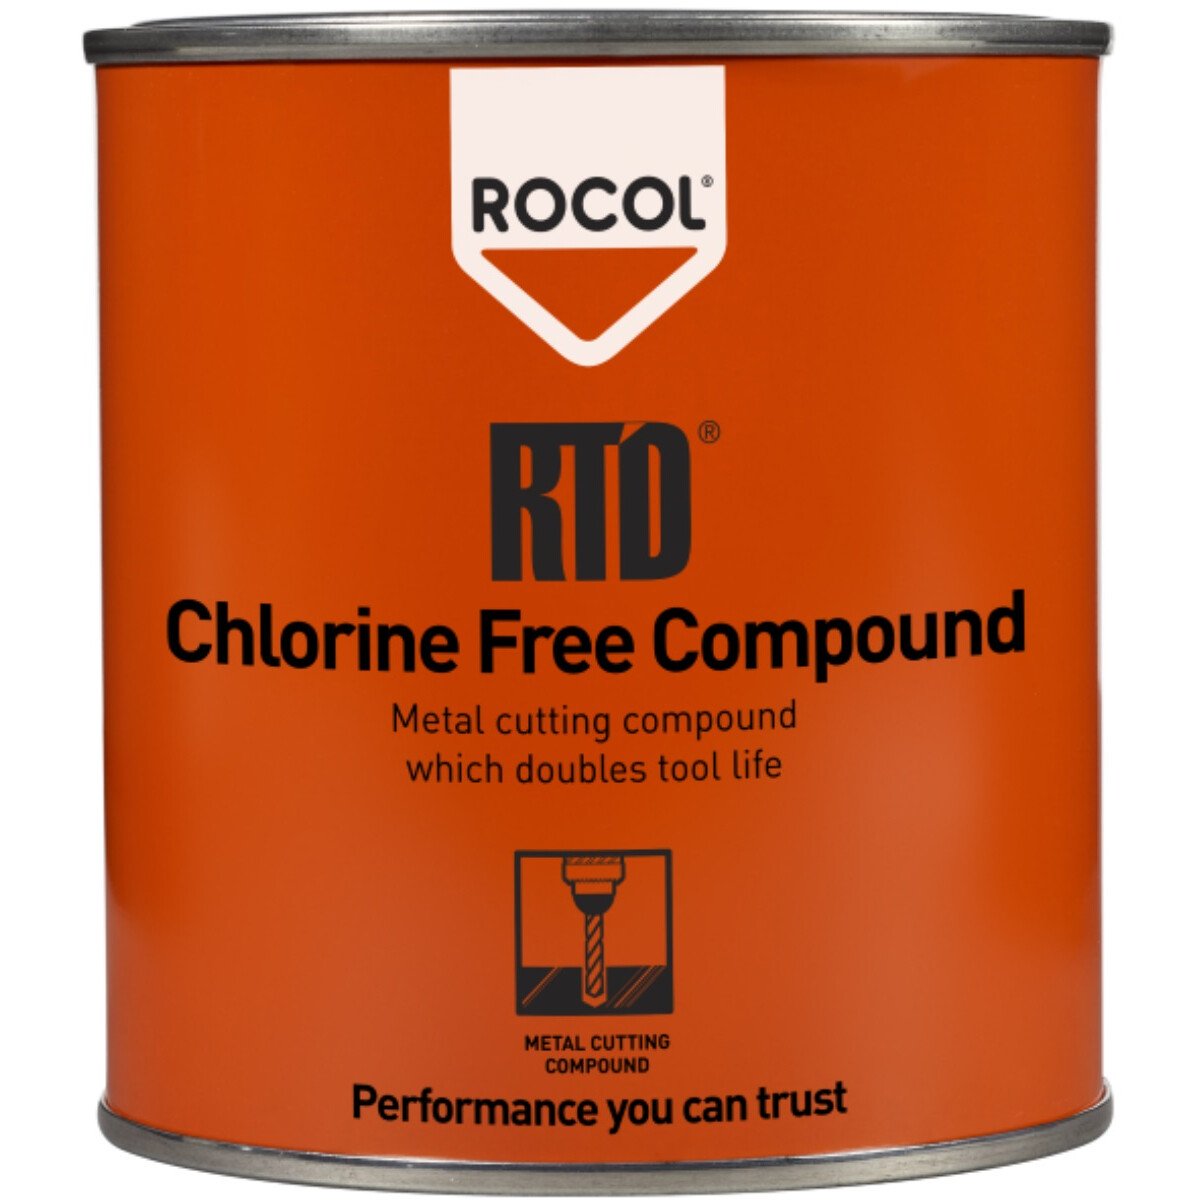 Rocol 53513 RTD Chlorine Free Compound 450g (Pack of 12)